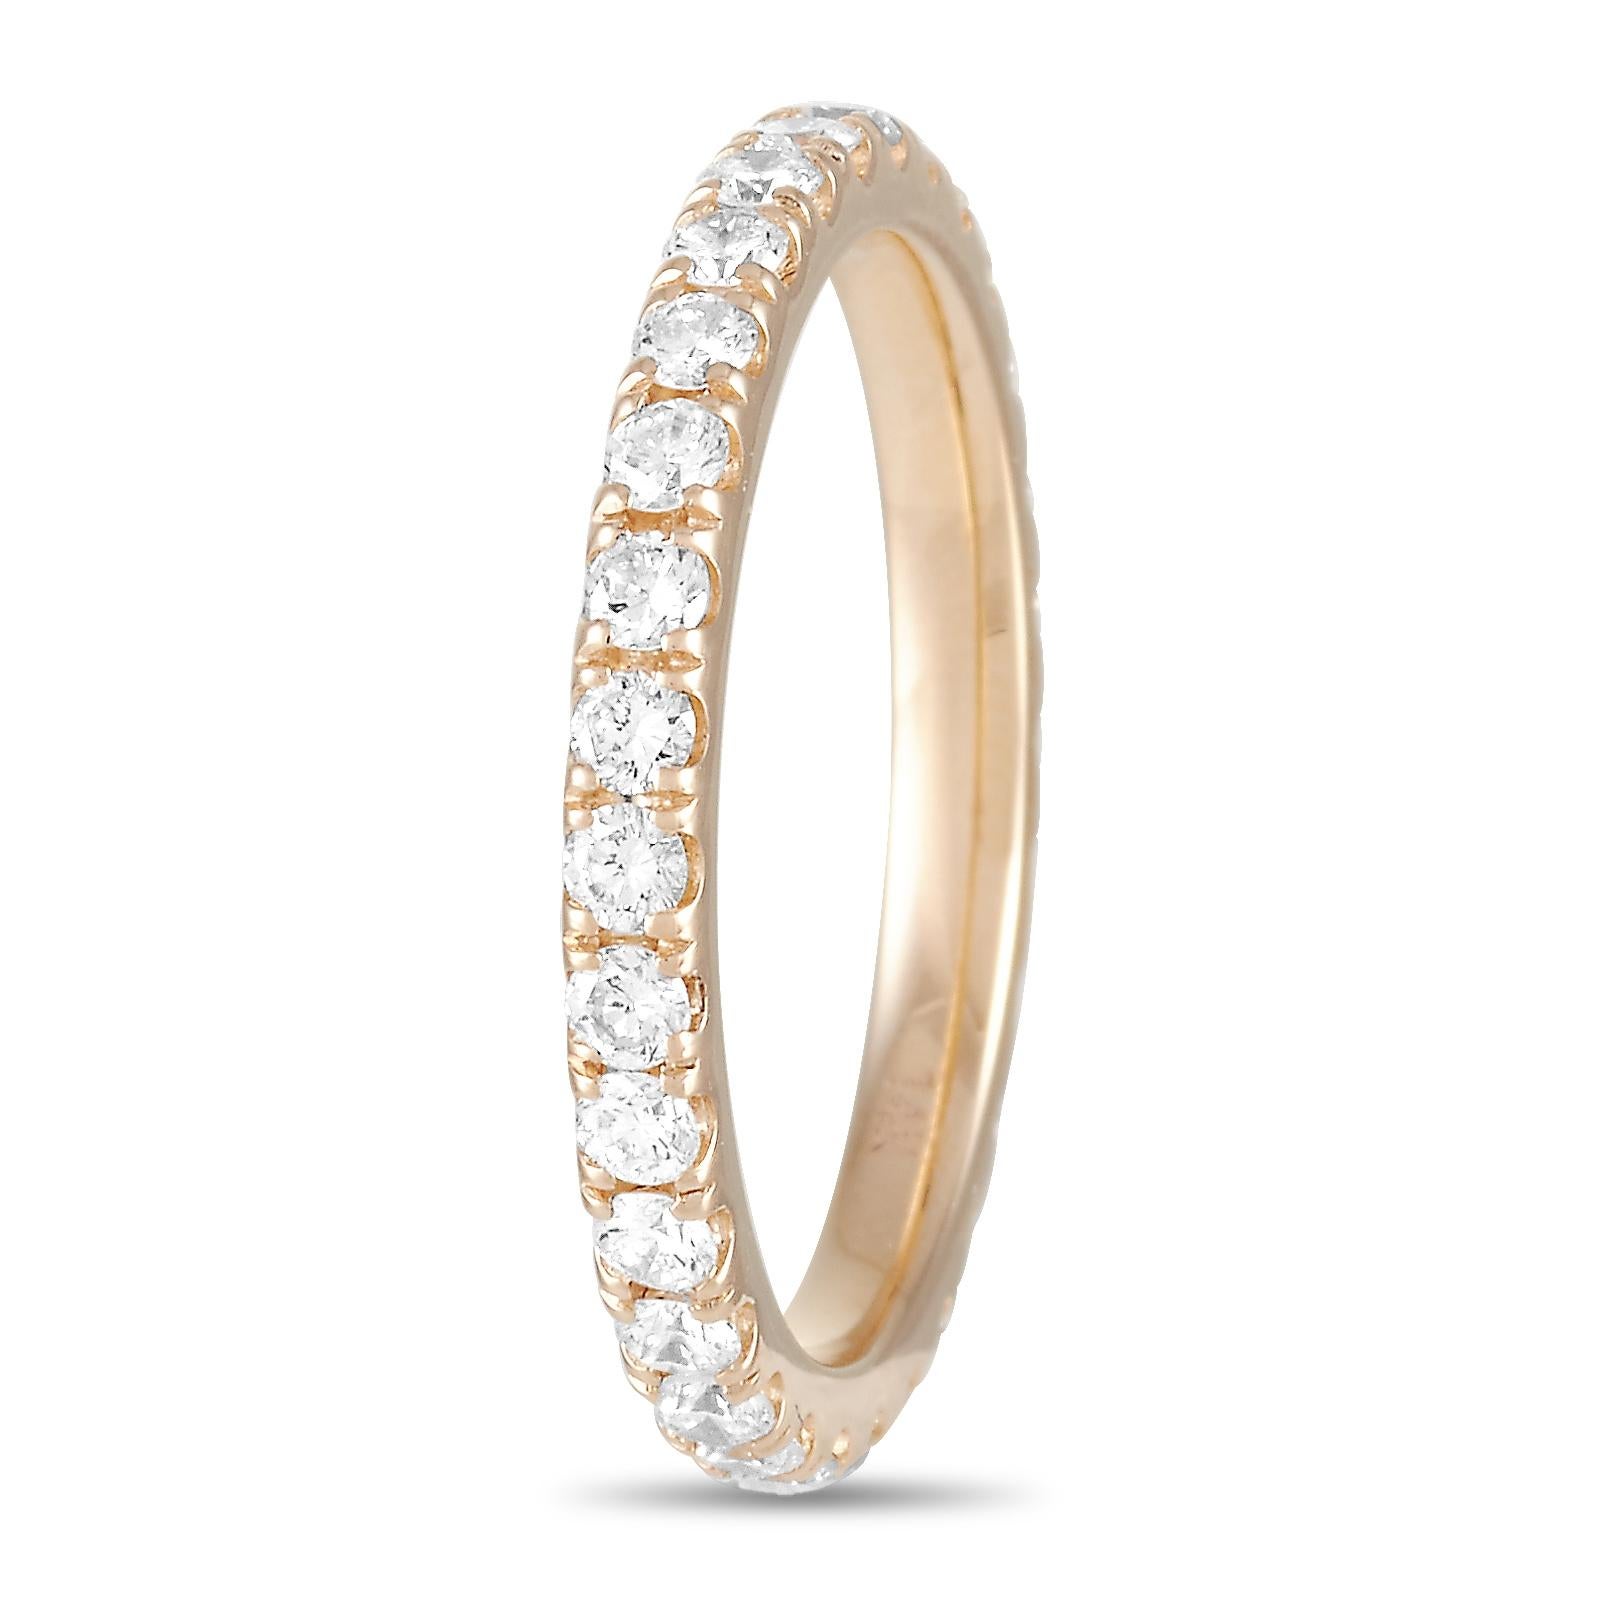 This LB Exclusive ring is made of 14K yellow gold and embellished with diamonds that amount to 1.03 carats. The ring weighs 2.6 grams and boasts band thickness of 2 mm.
 
 Offered in brand new condition, this jewelry piece includes a gift box.
Ring